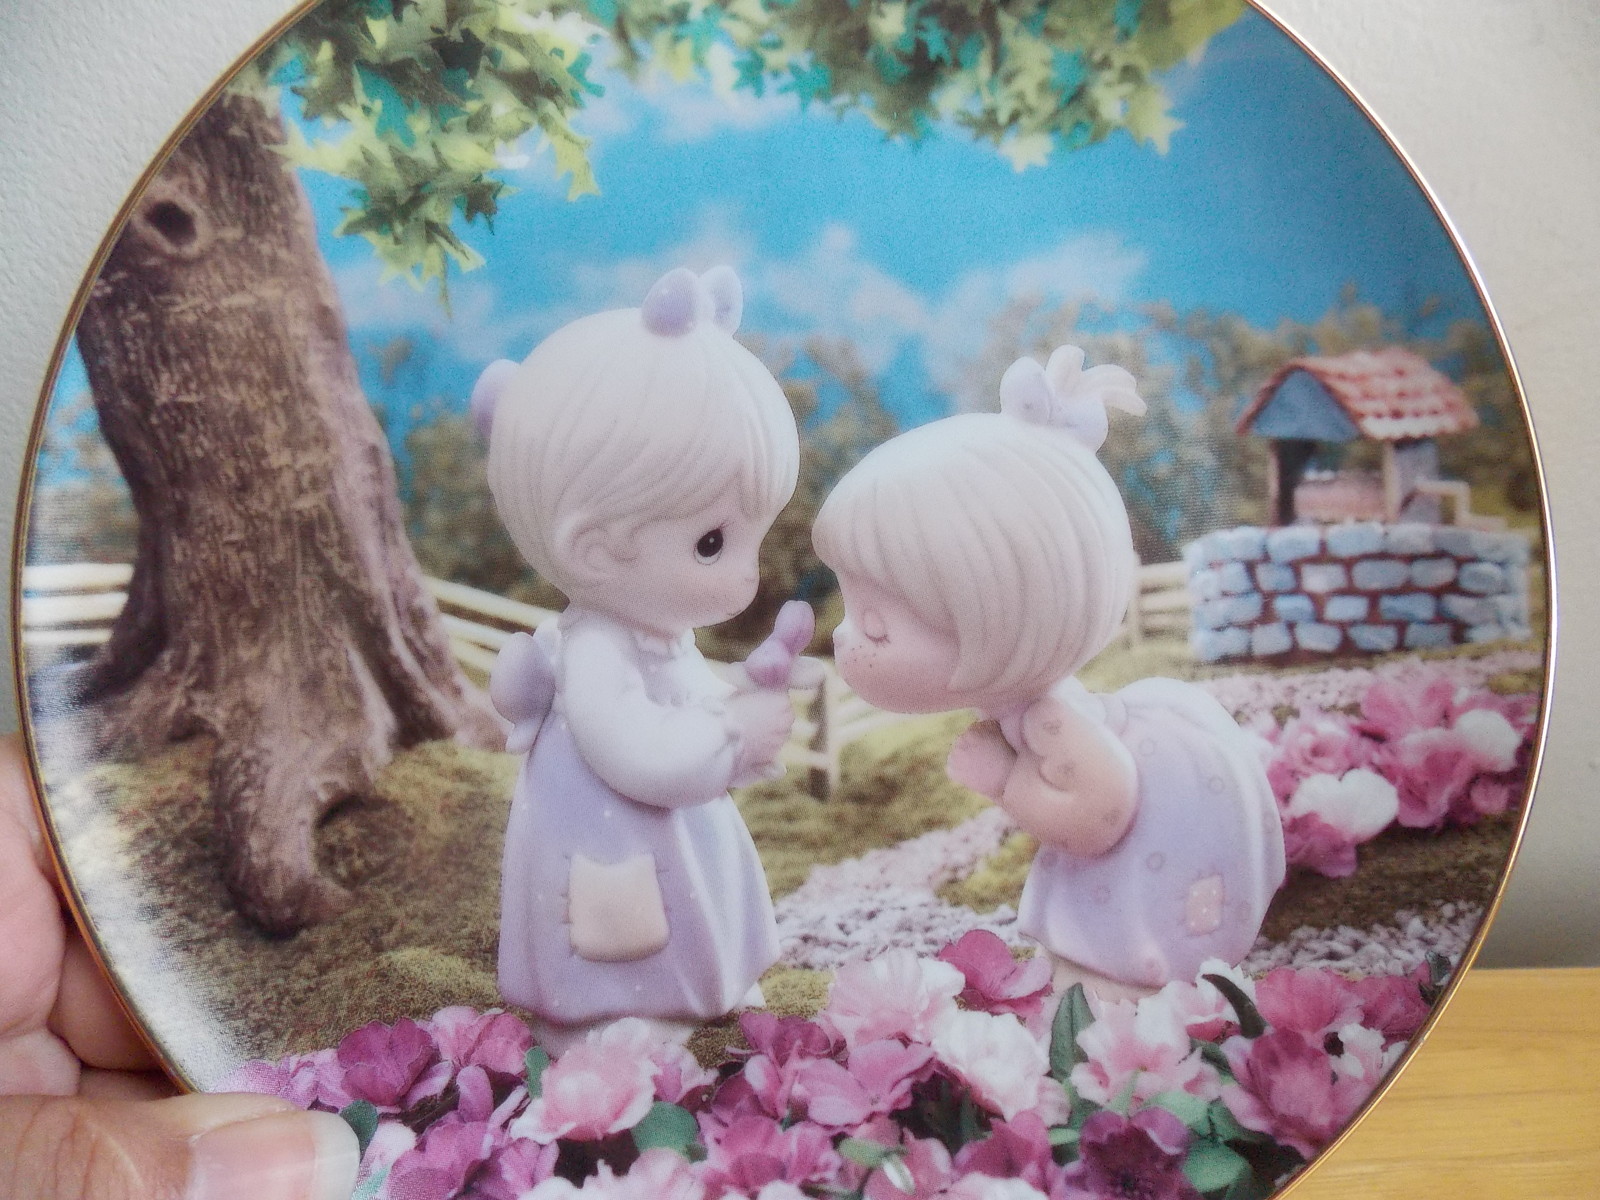 1994 Precious Moments Good Friends are Forever Collector’s Plate  - $25.00